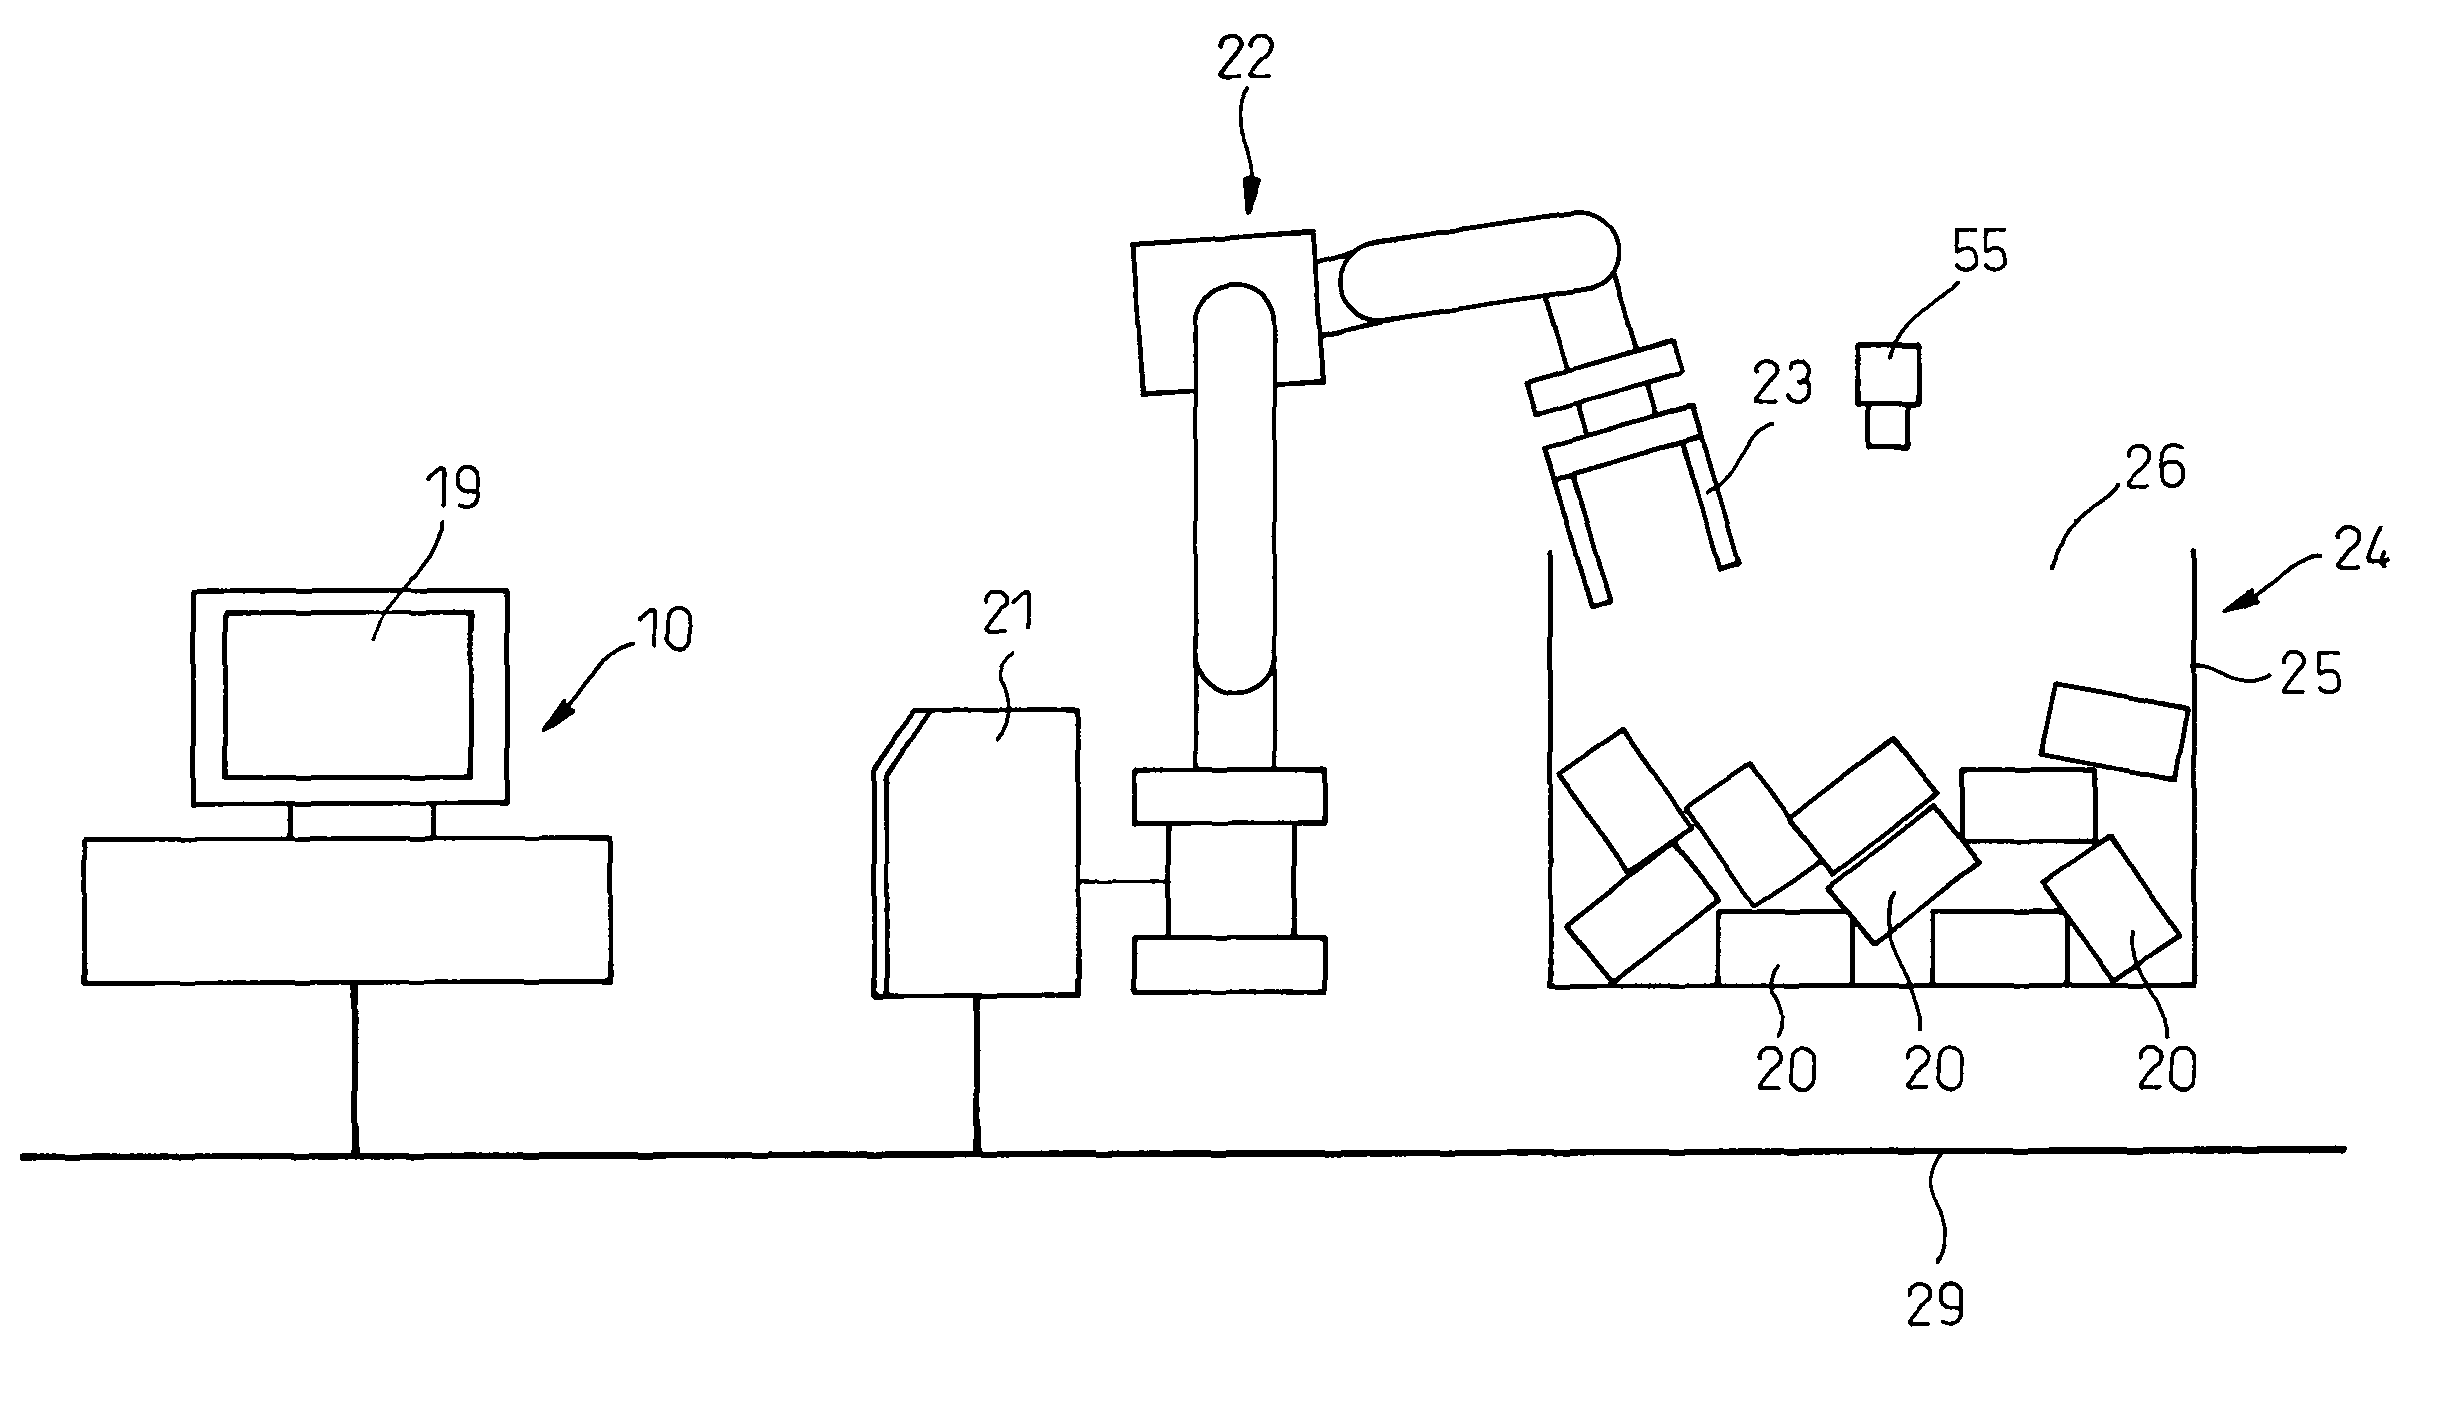 Apparatus simulating operations between a robot and workpiece models